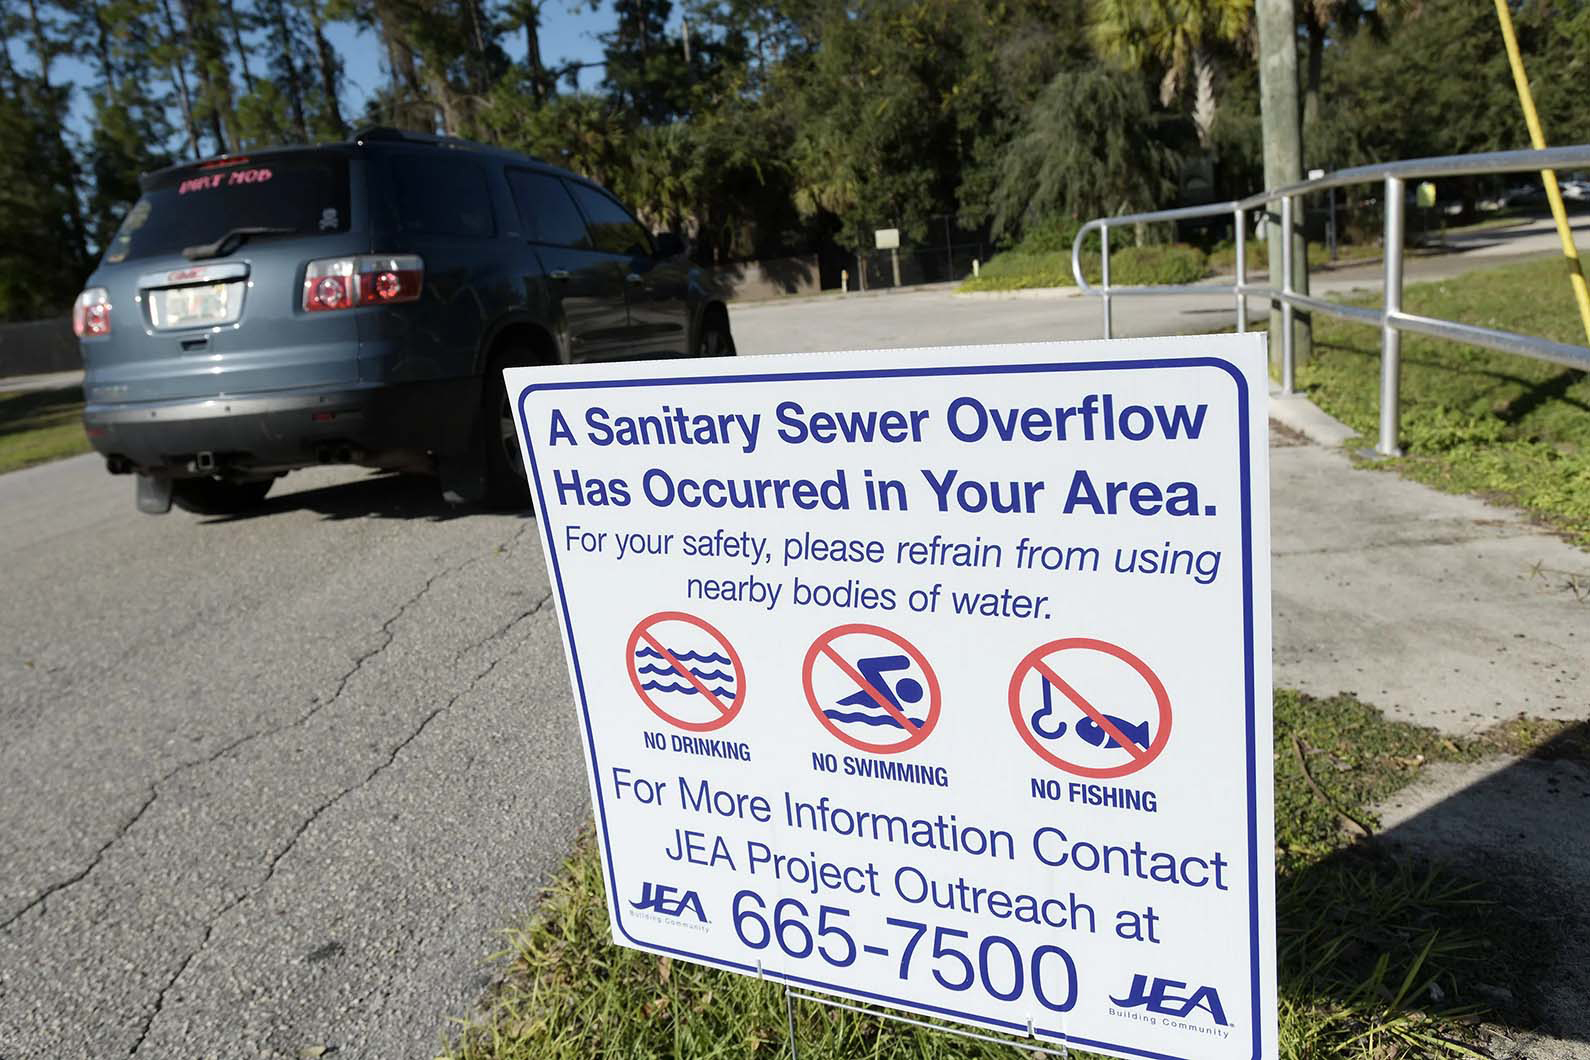 a sign on a road reads "A Sanitary Sewer Overflow has Occurred in Your Area"